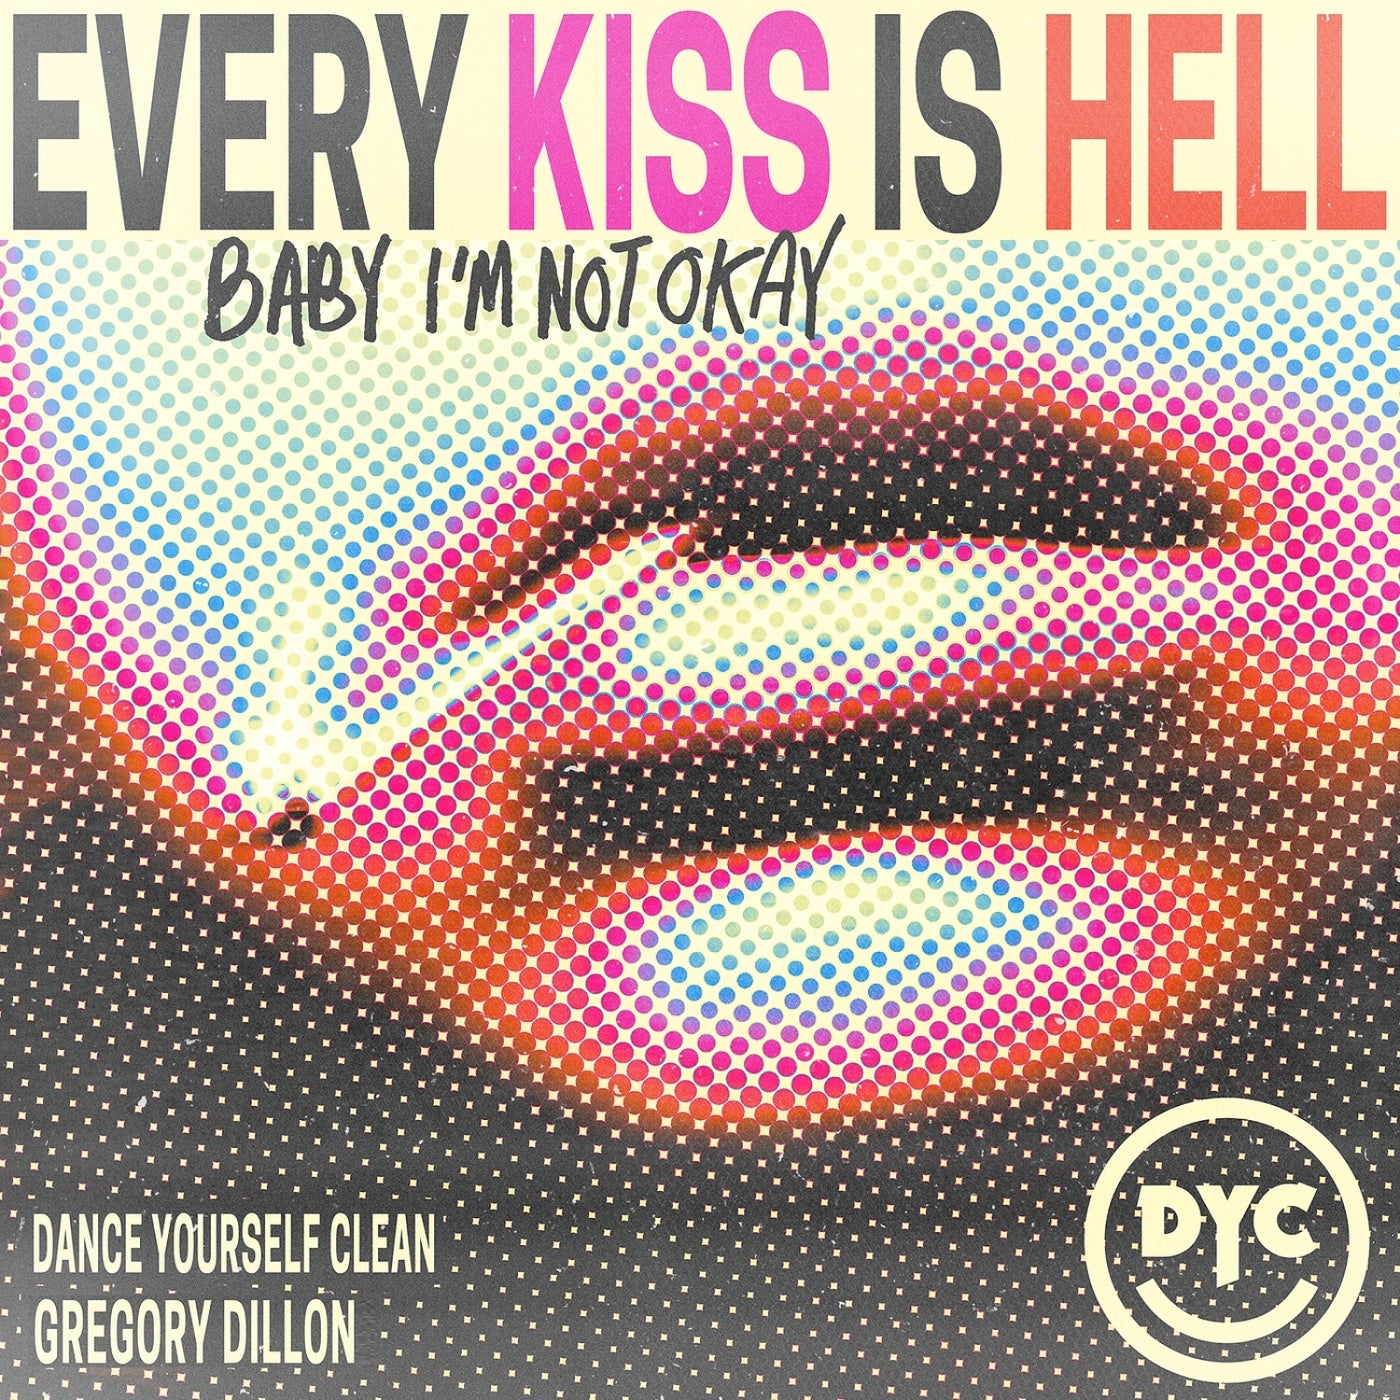 Every Kiss Is Hell